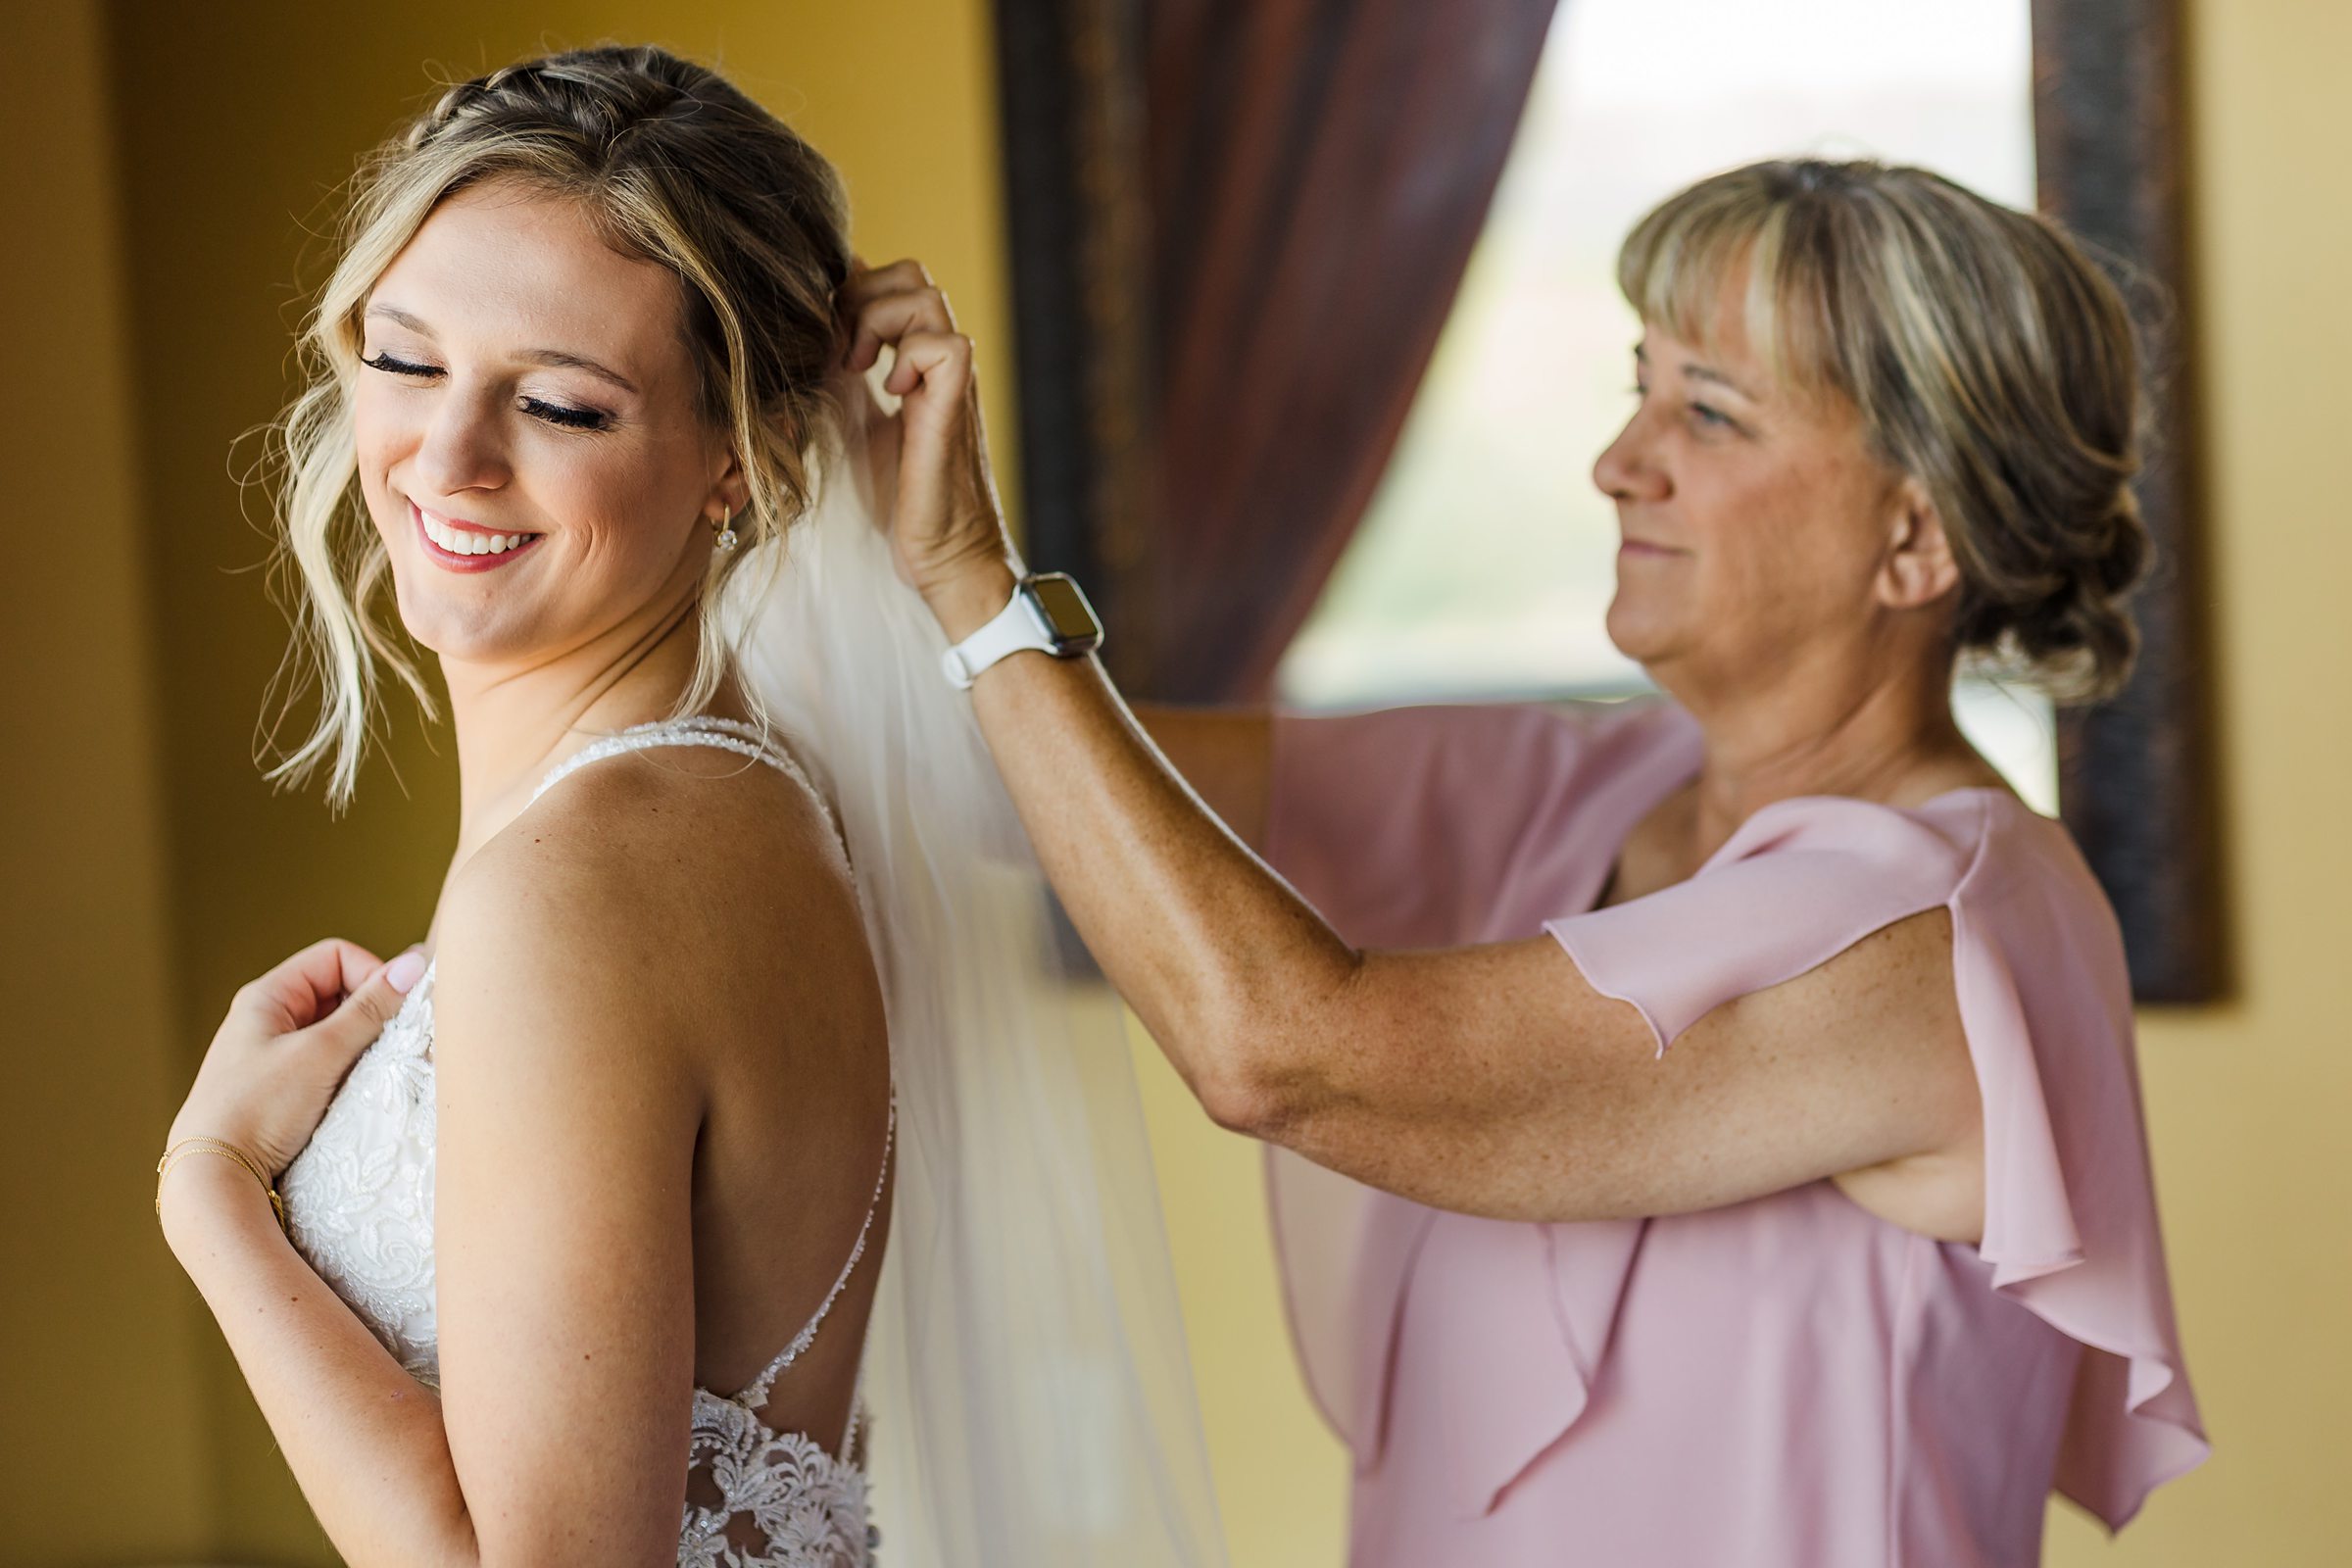 Mom puts the brides veil before her wedding at the Luthy Botanical Garden in Peoria, Illinois